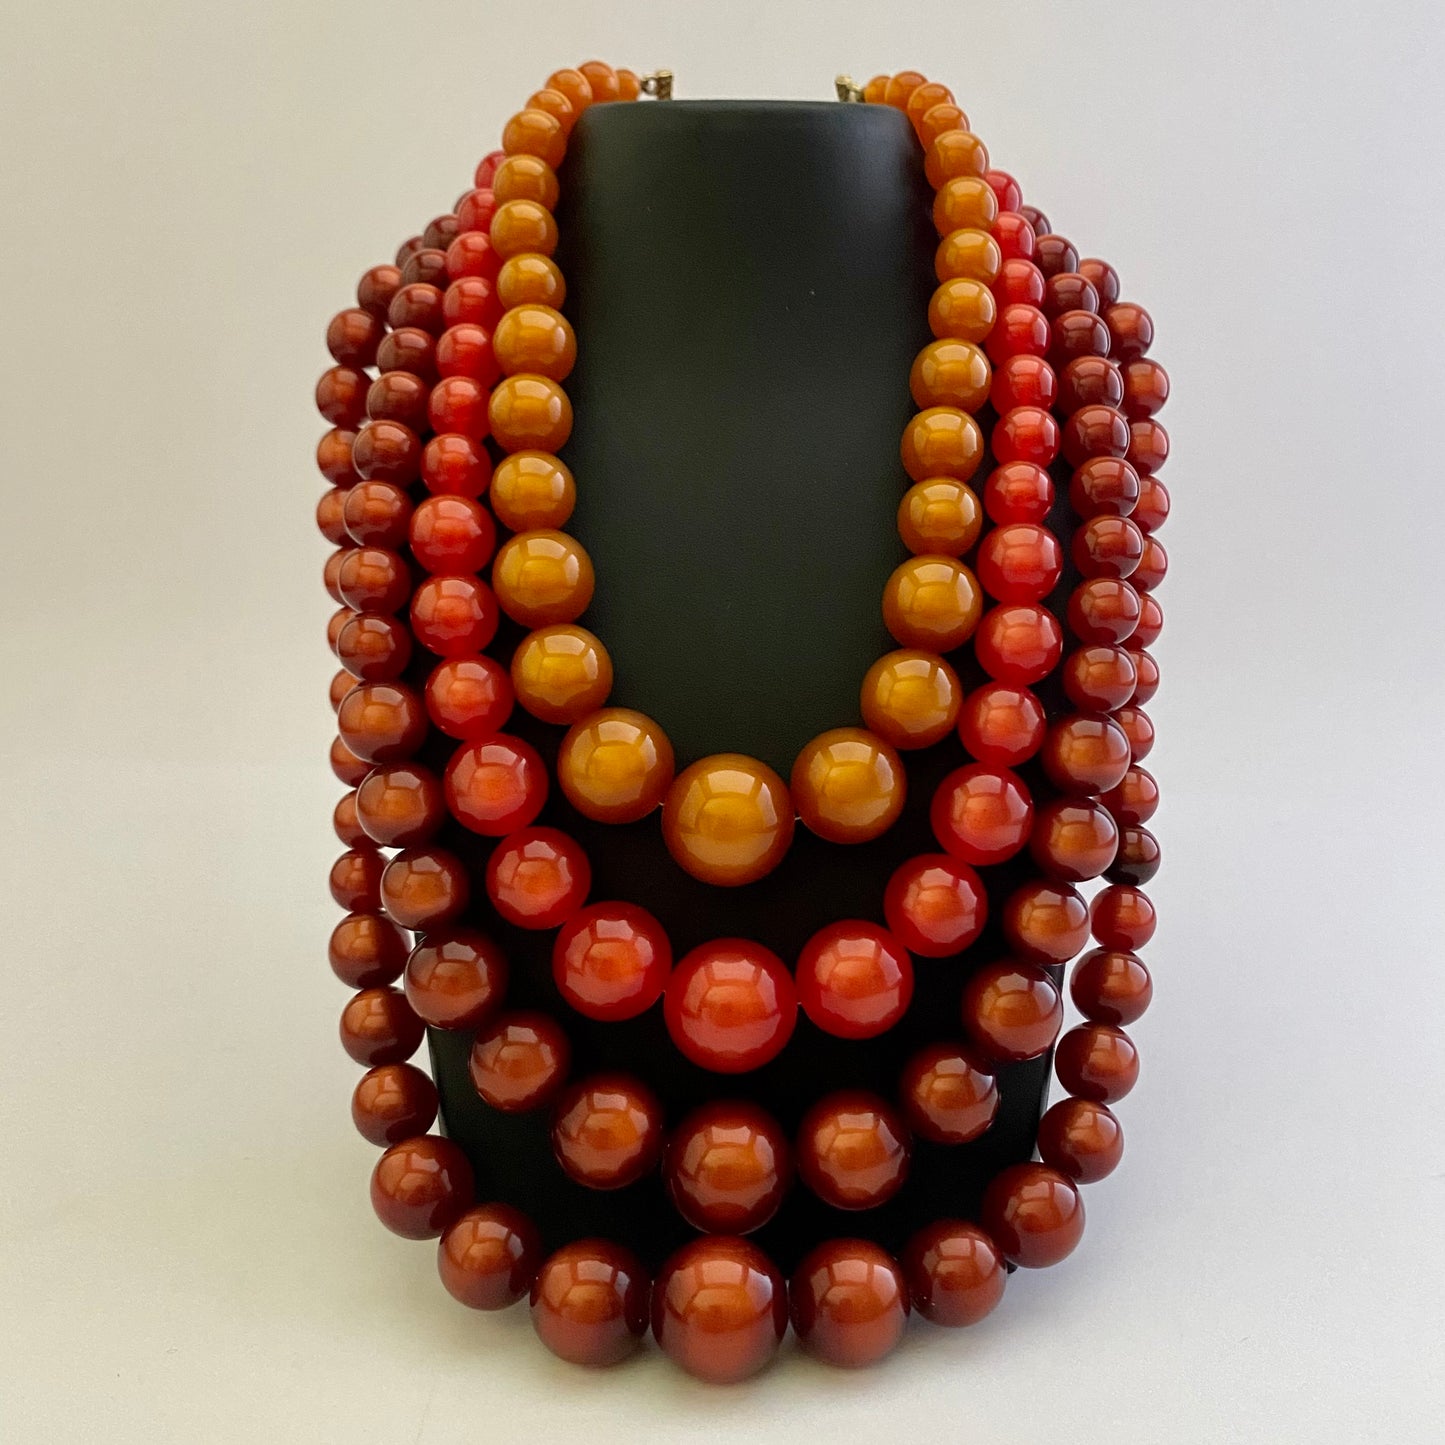 1960s 4 Strand Moonglow Bead Necklace